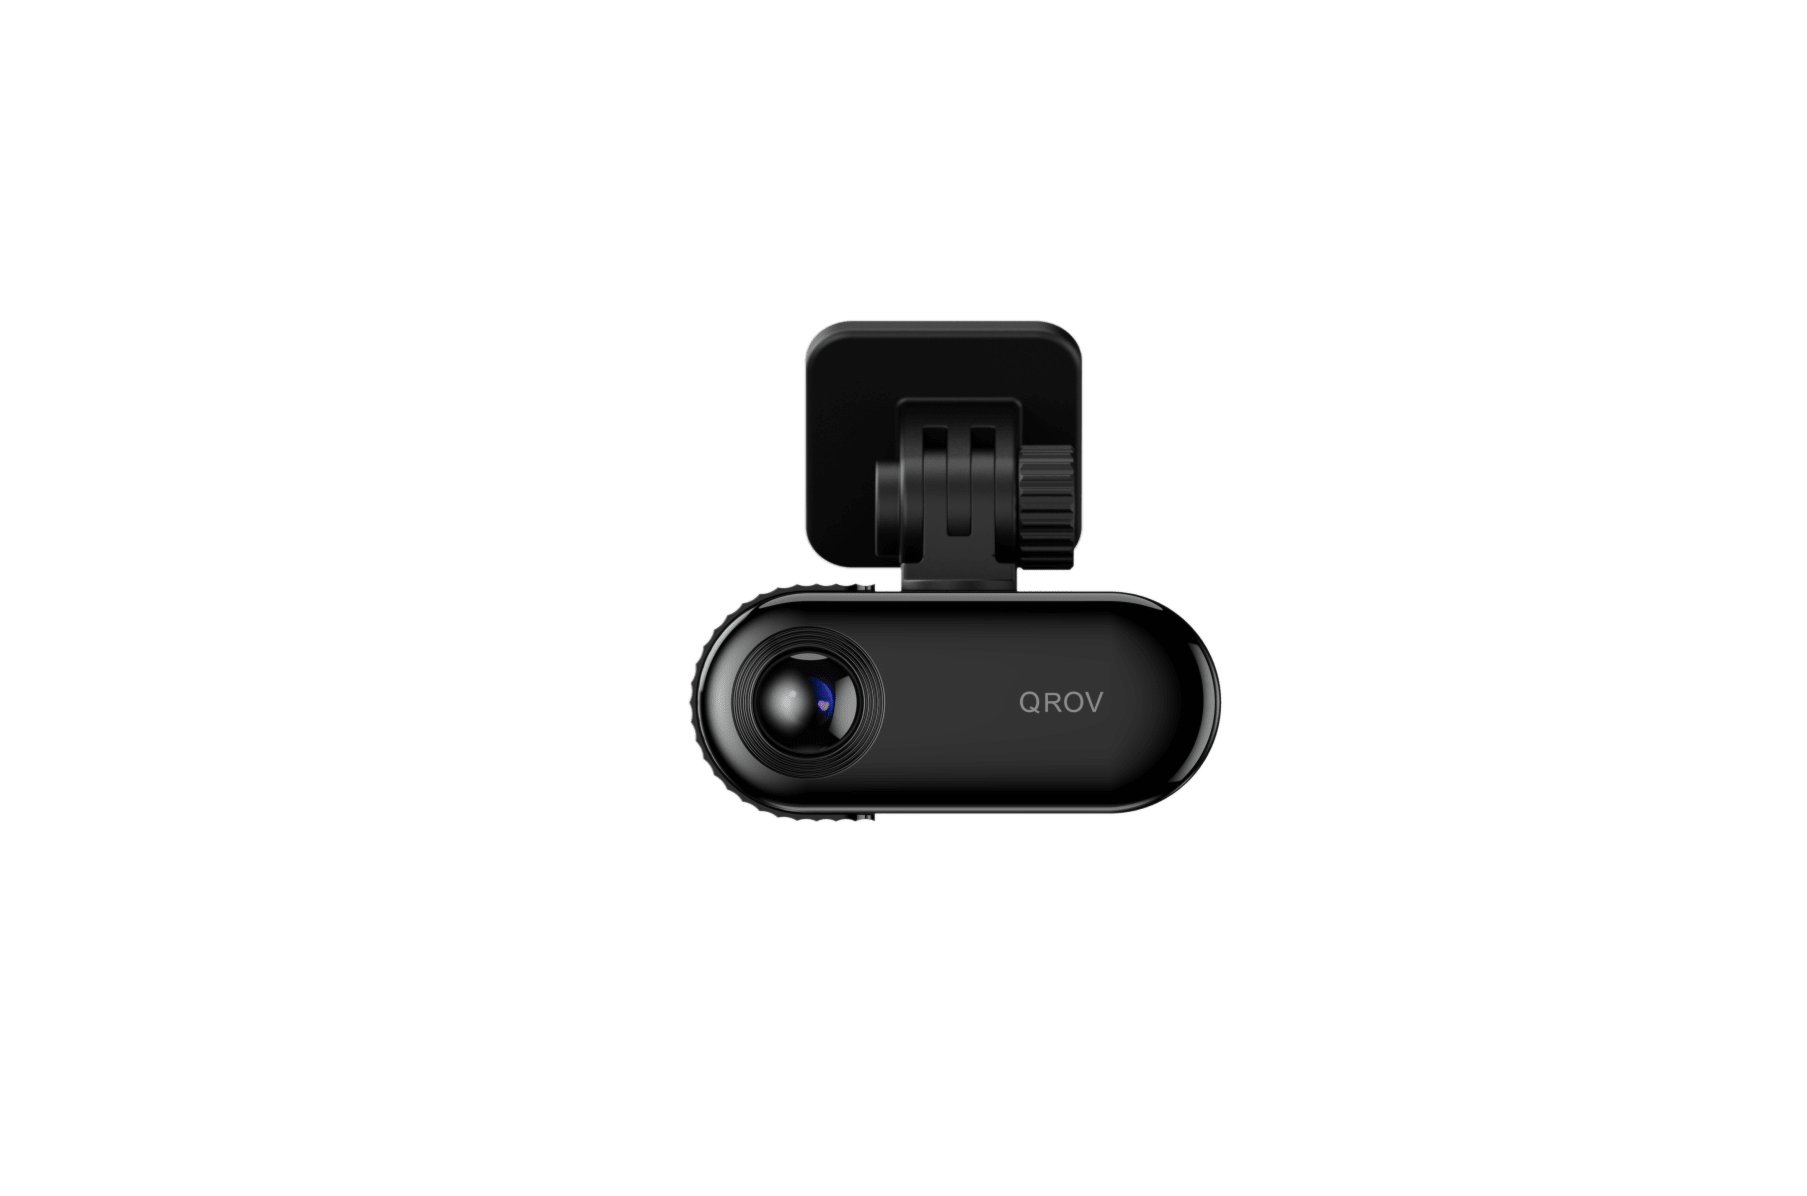 QROV: World First 510-degree Smart Dashcam with 4G